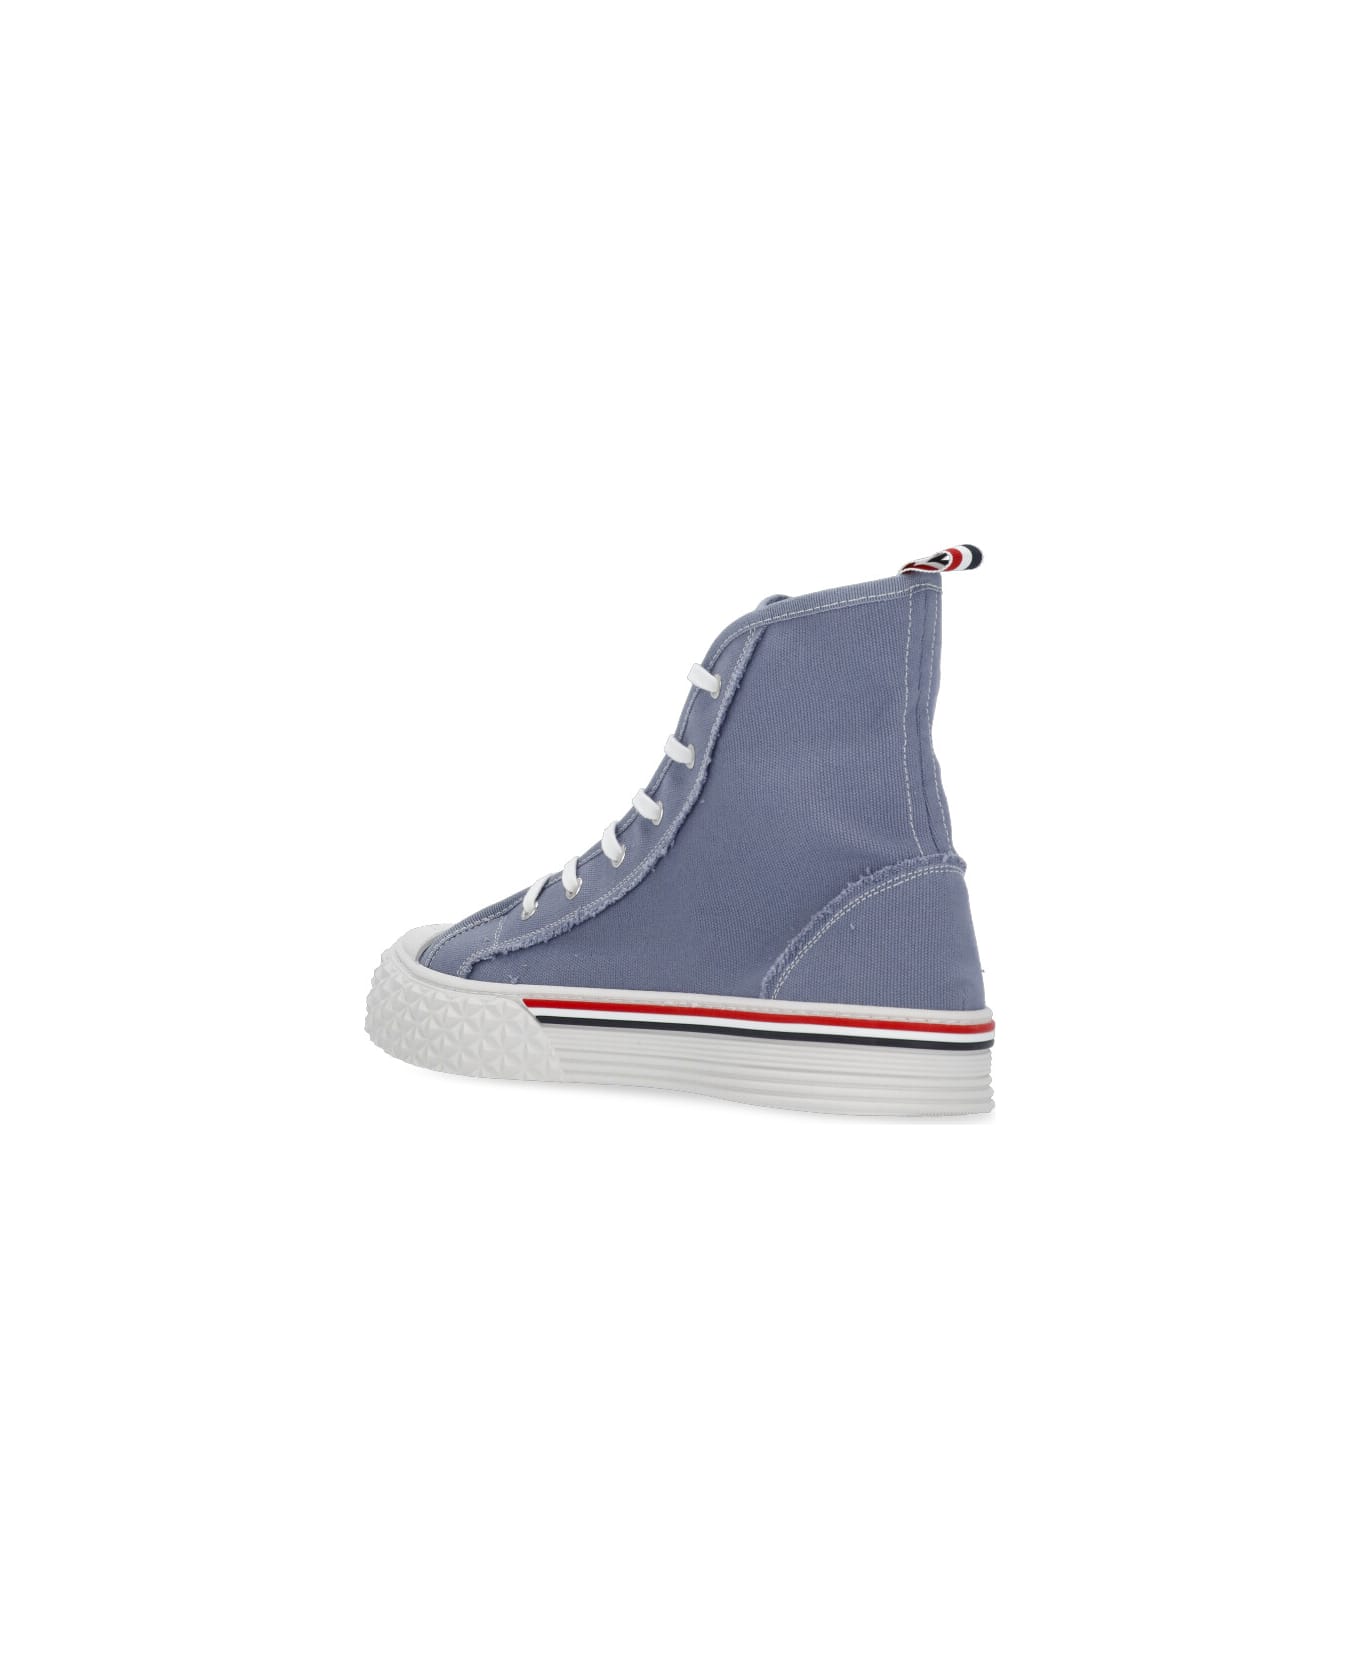 Thom Browne Sneakers In Light Blue Canvas - Light Blue スニーカー